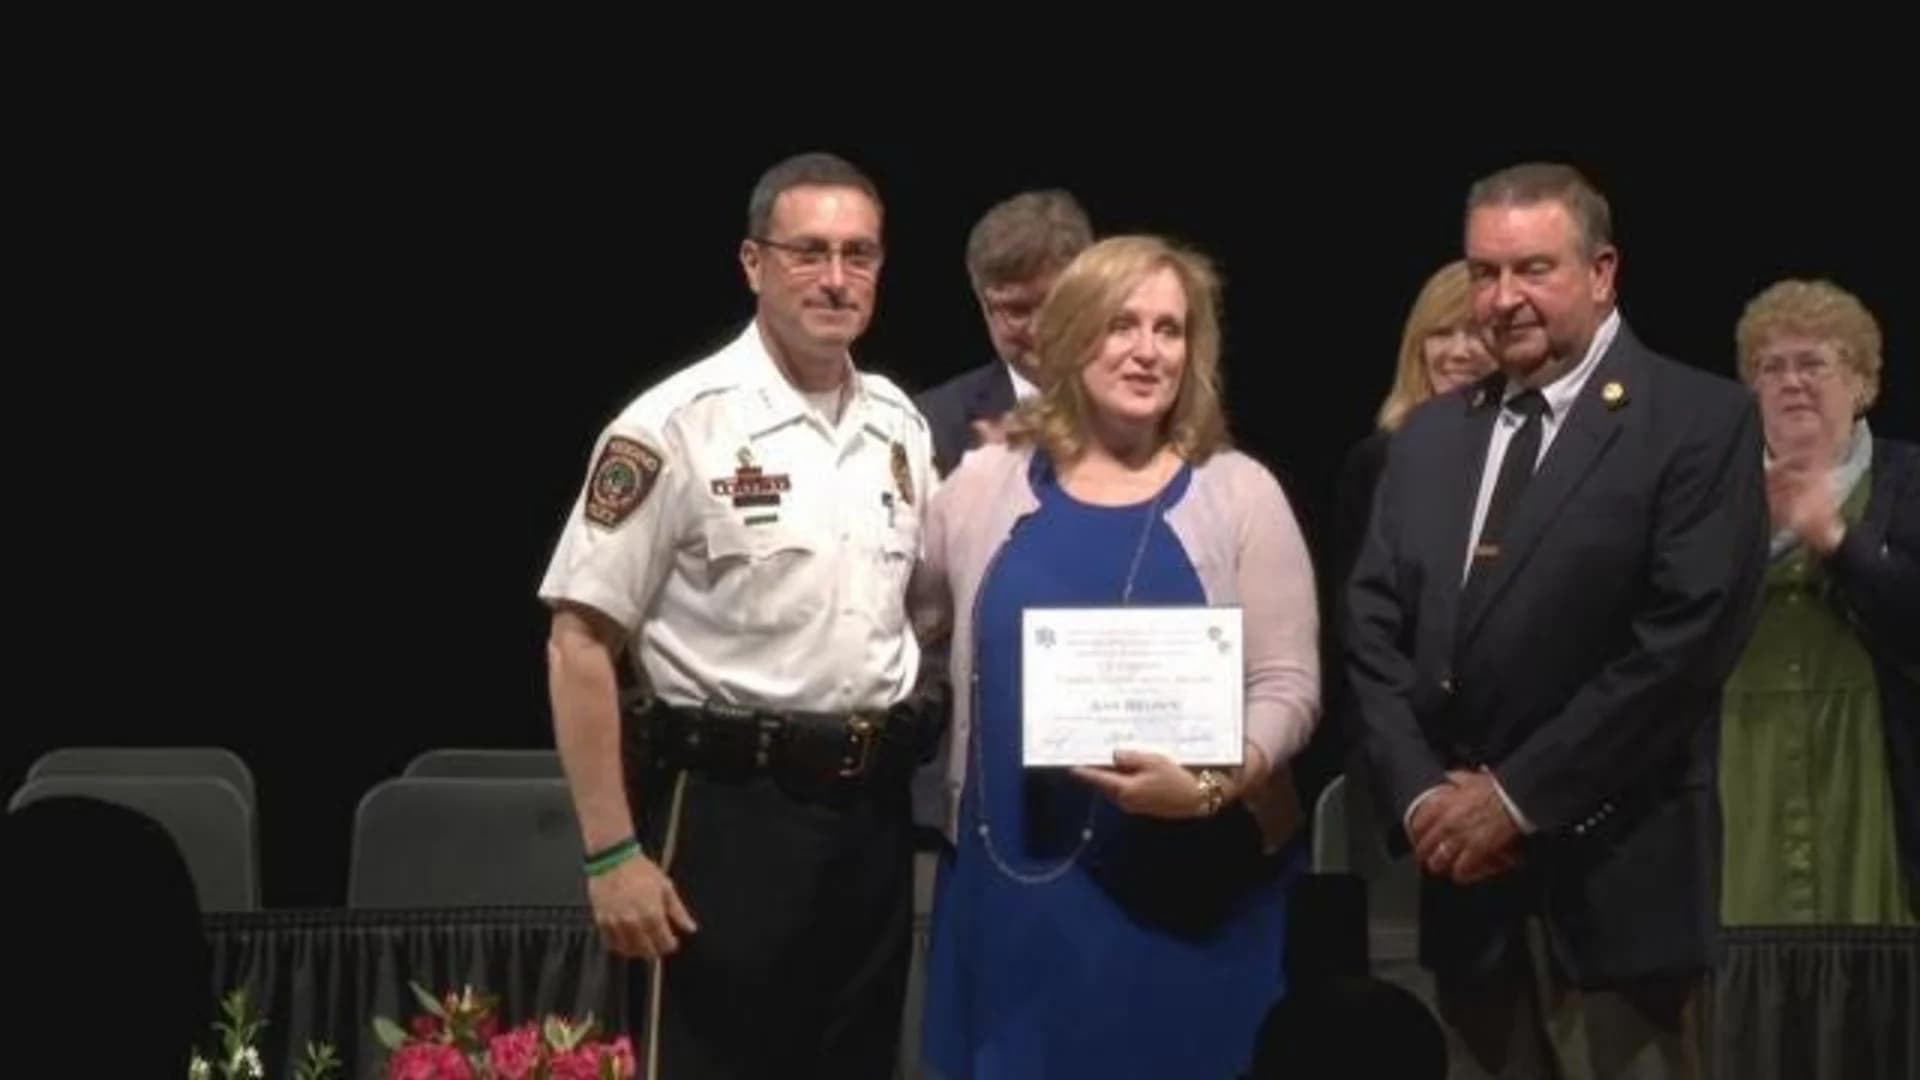 Good Samaritans honored for helping teens after serious car accident